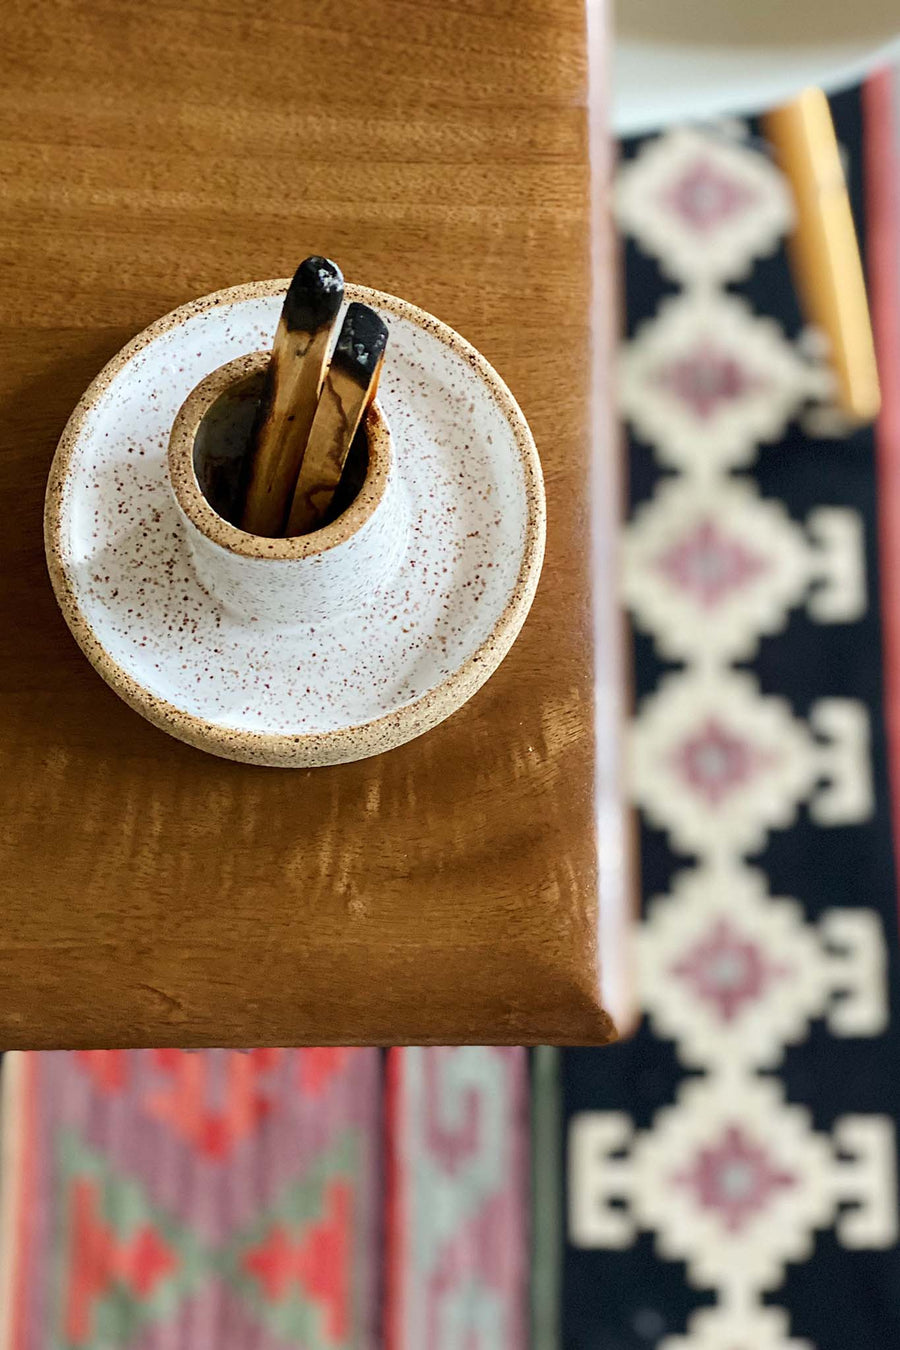 Palo santo holder and sage burning bowl made from white speckled clay with two burnt palo santo sticks  on a table with a patterned rug beneath